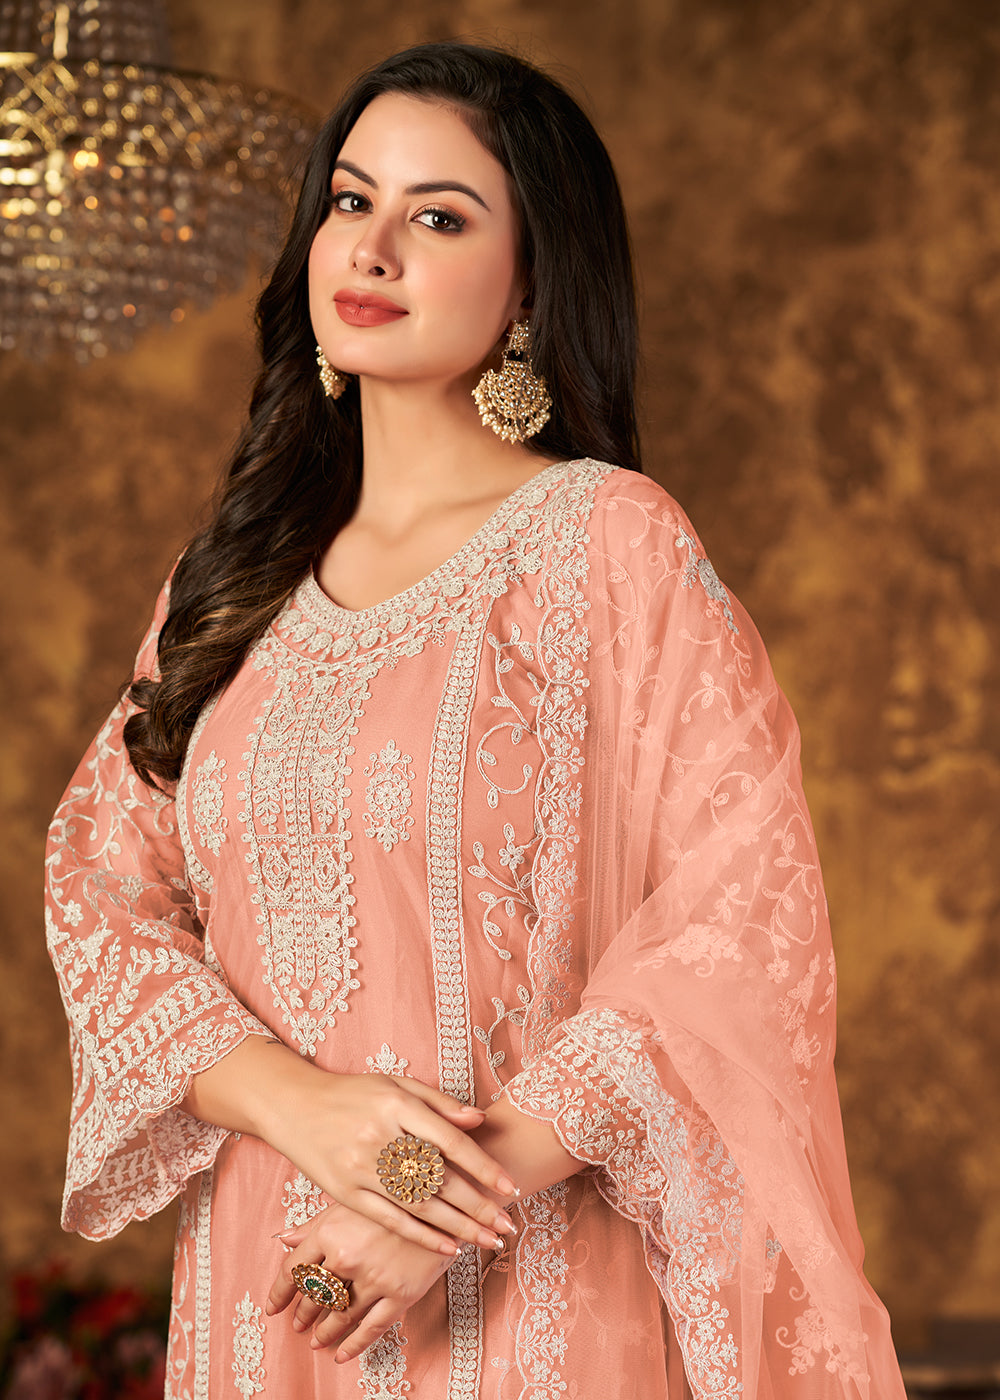 Buy Now Elegant Peach Cording Embroidered Net Palazzo Salwar Suit Online in USA, UK, Canada & Worldwide at Empress Clothing.